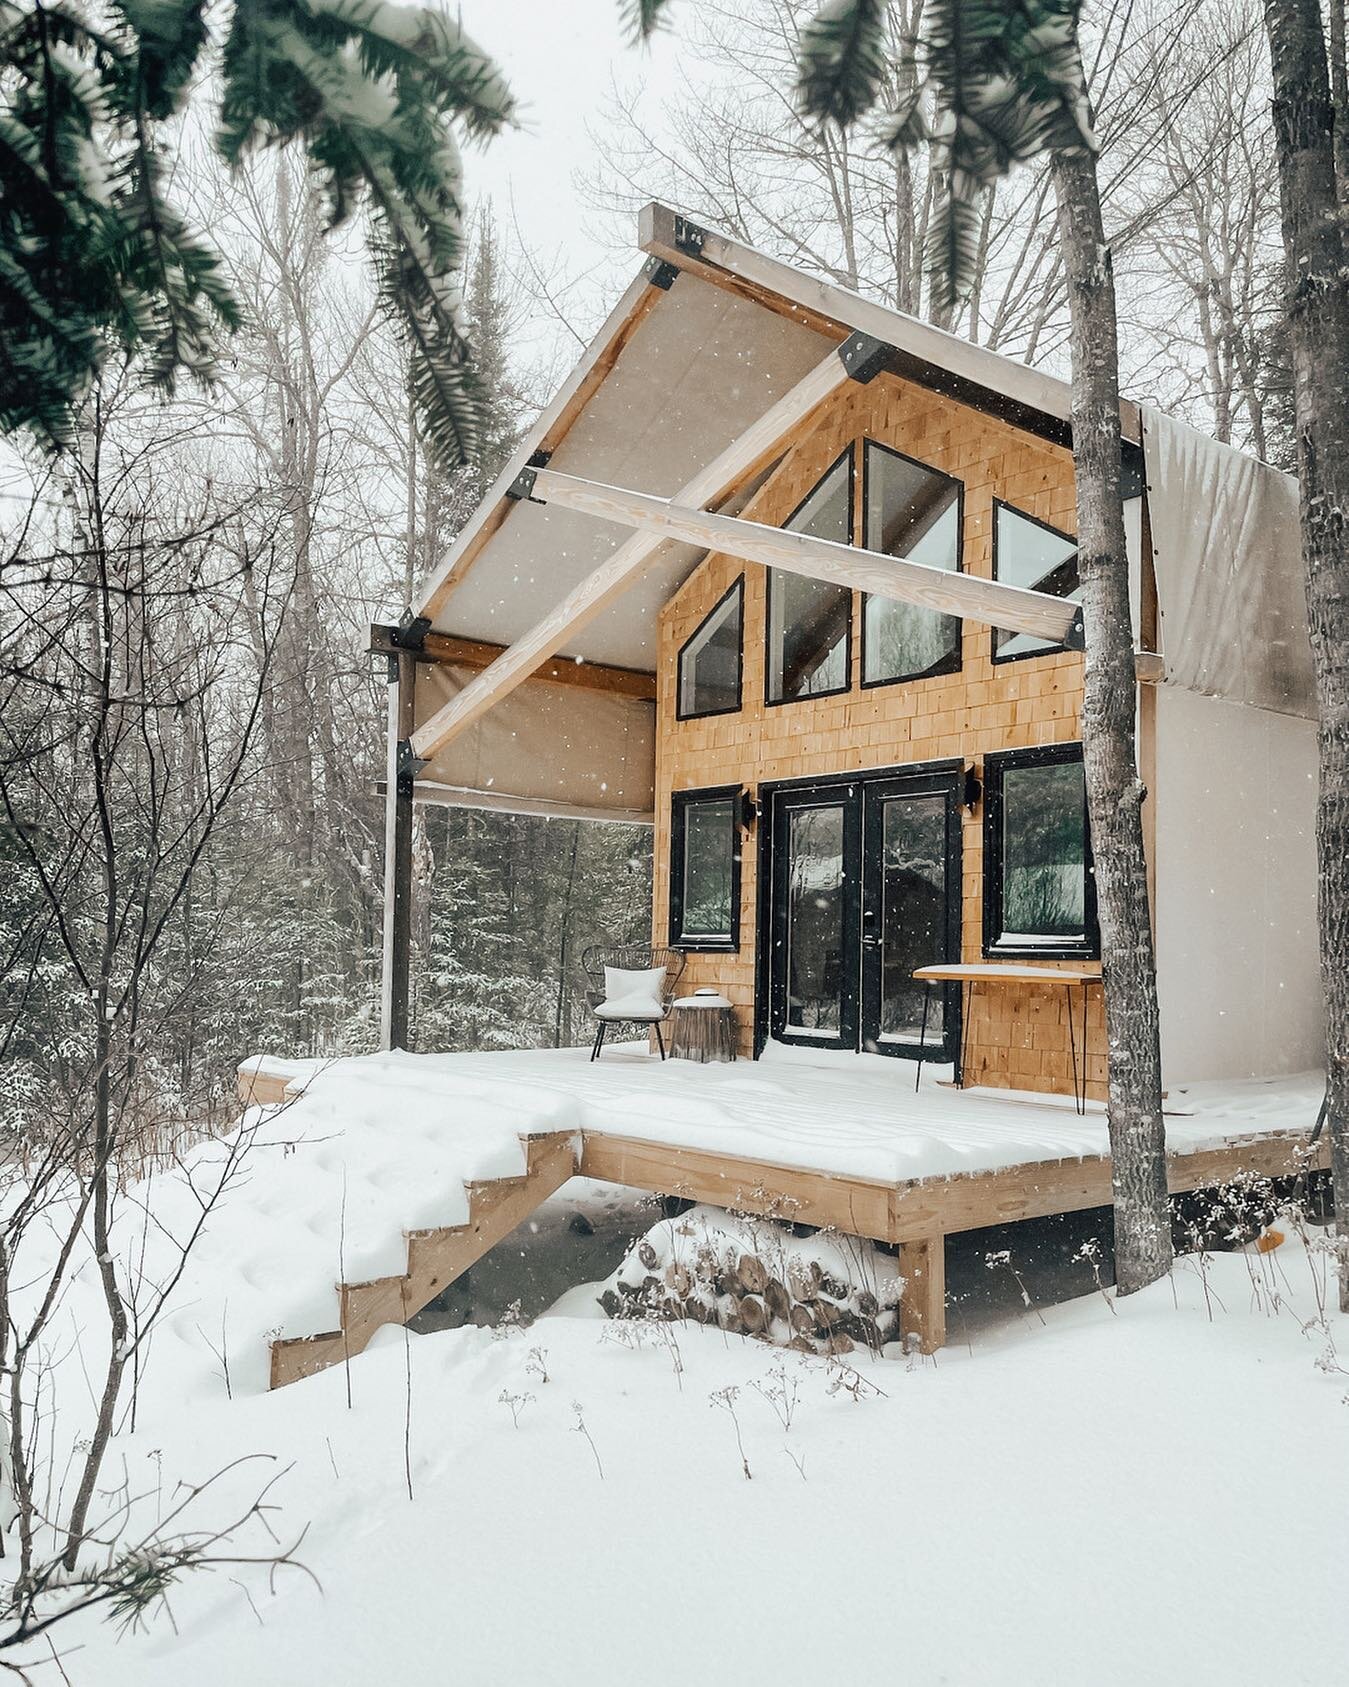 Winter has arrived to our neck of the woods...❄️
⠀⠀⠀⠀⠀⠀⠀⠀⠀
When Cedar Bound was just a twinkle in our eye, we knew we wanted to develop a structure that not only lasts 10x longer than typical glamping structures on the market, but also endures winter